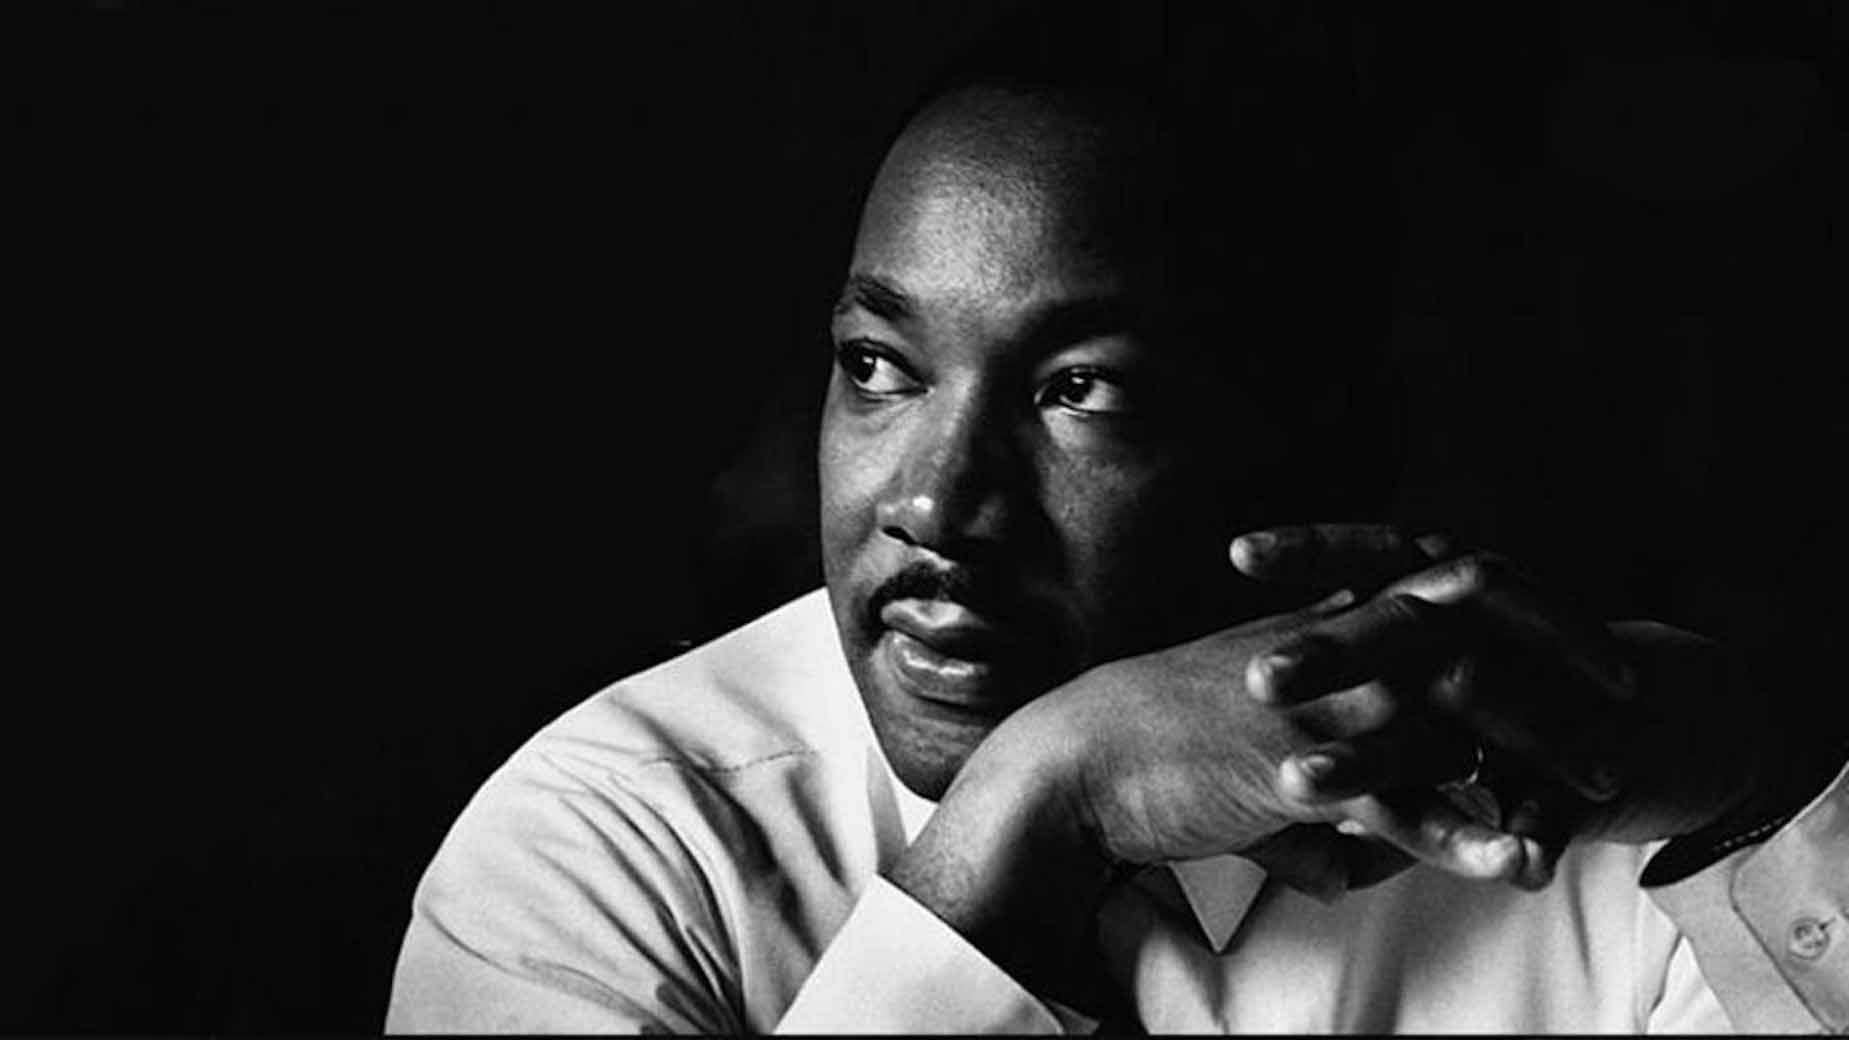 5 Simple Ways to Keep Dr. King’s Dream Alive